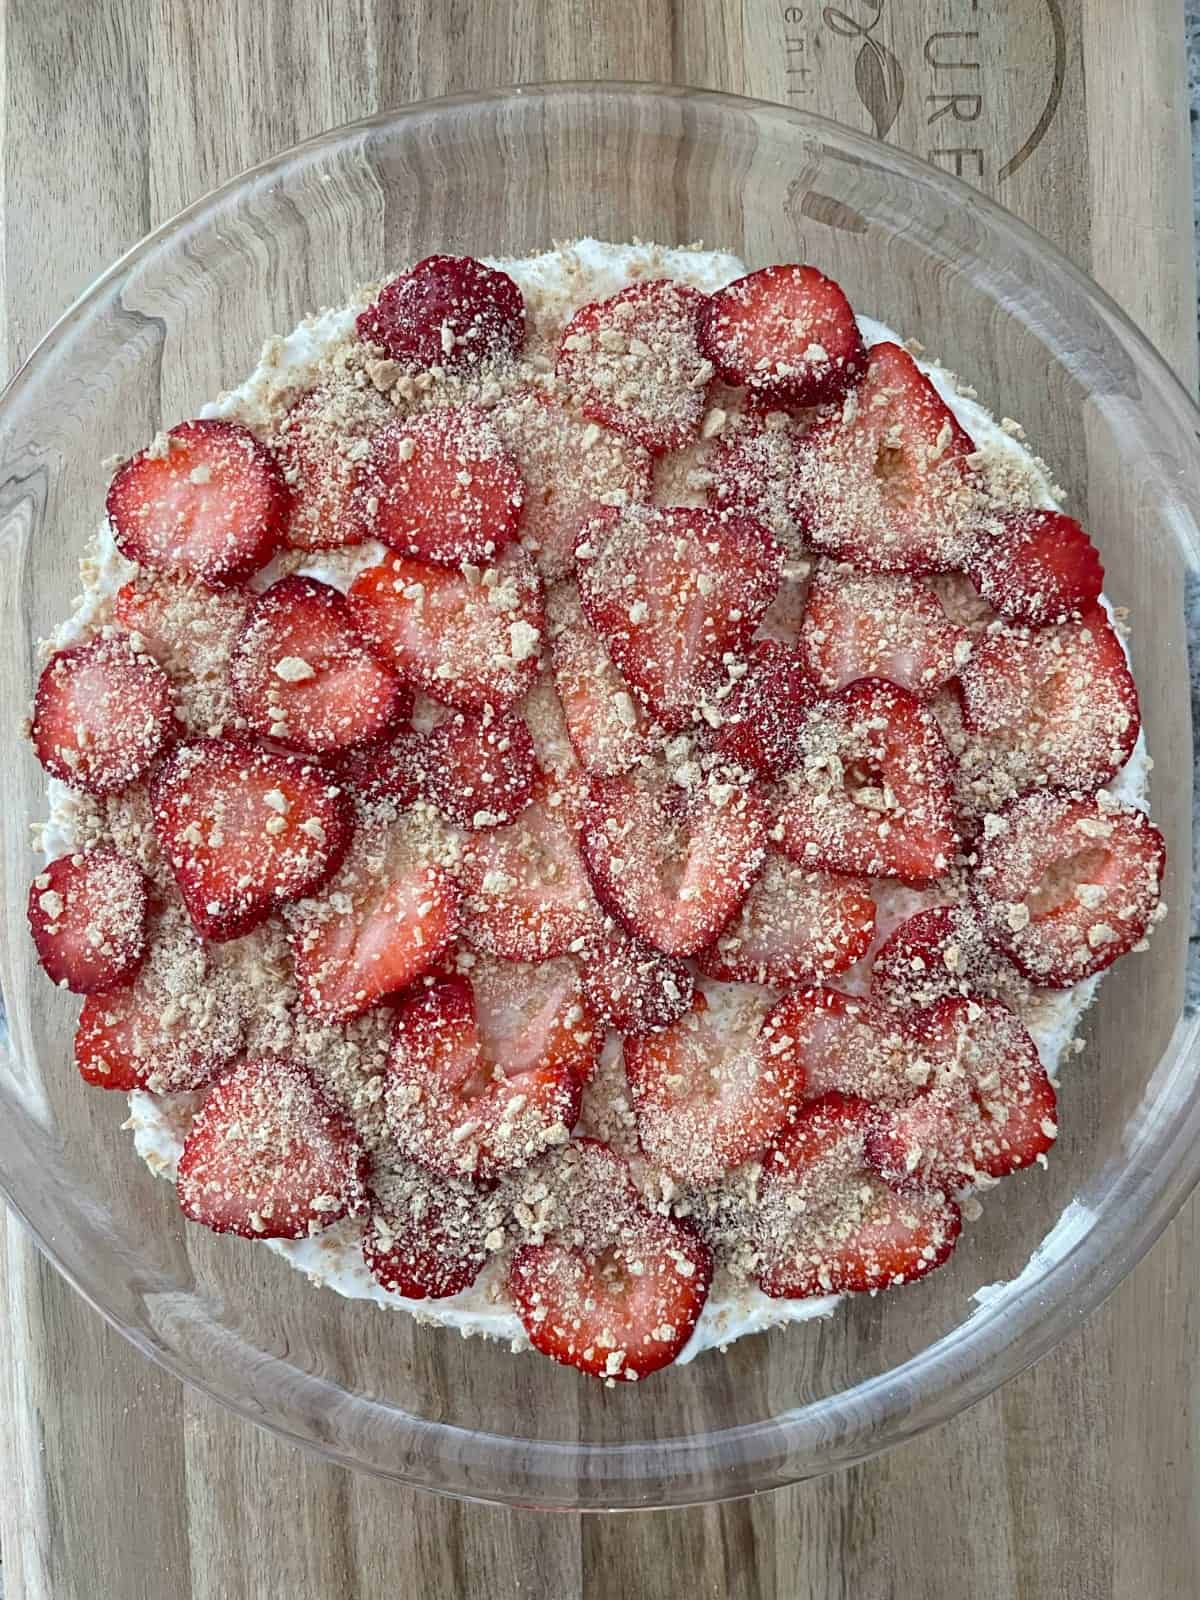 Scoopable strawberry cheesecake no-bake dessert in glass pie dish on wood cutting board.